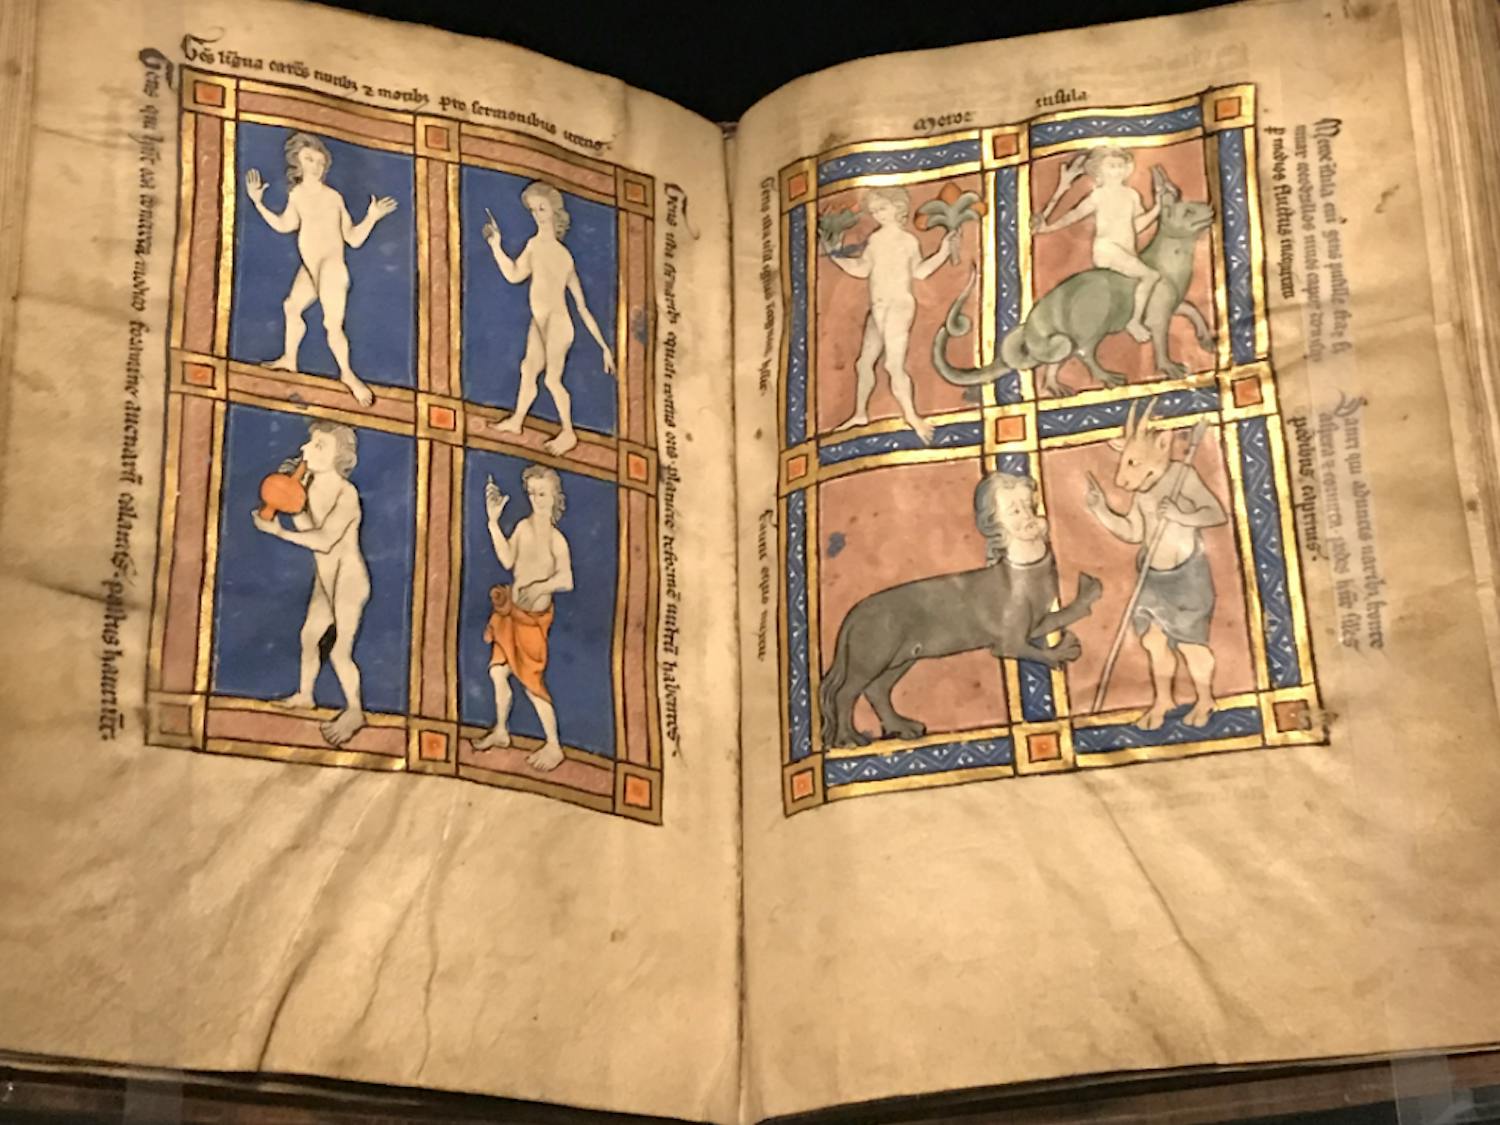 The Monstrous People, a book published after 1277, is on exhibit at the Paul Getty Museum in Los Angeles. Photo Courtesy of J. Paul Getty Museum in Los Angeles